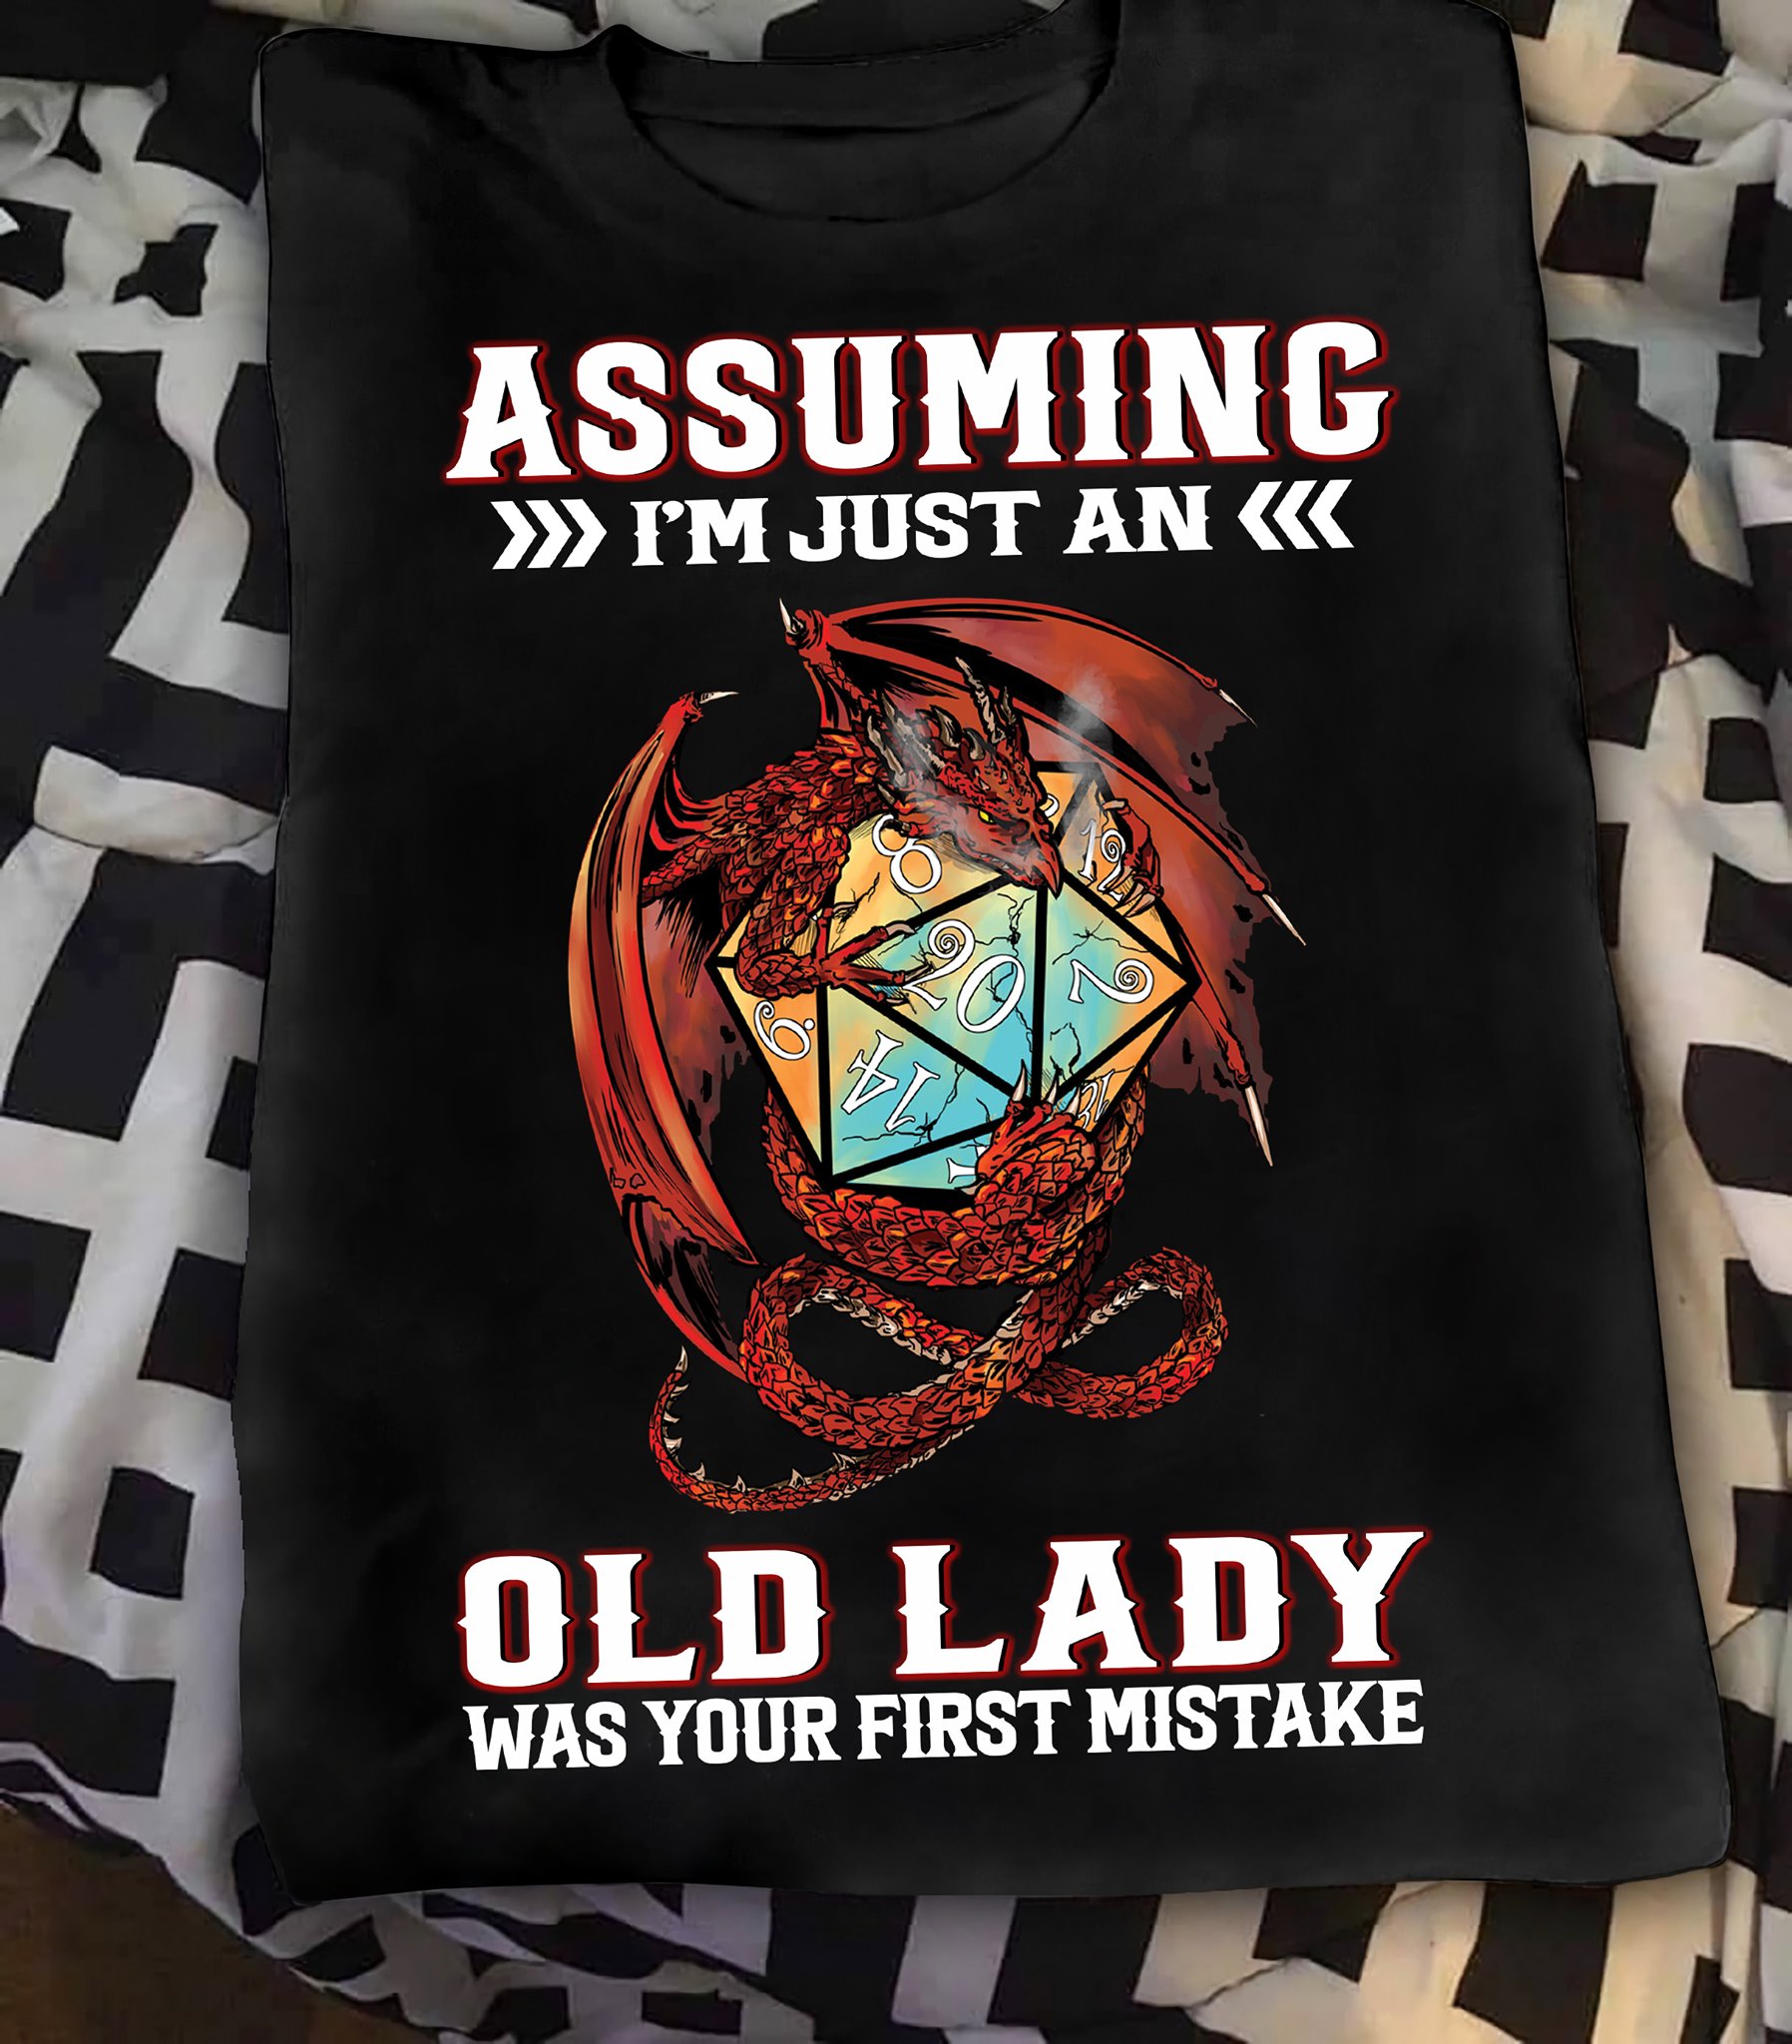 Asssuming I'm just an old lady was your first mistake - Dragon and d&d game